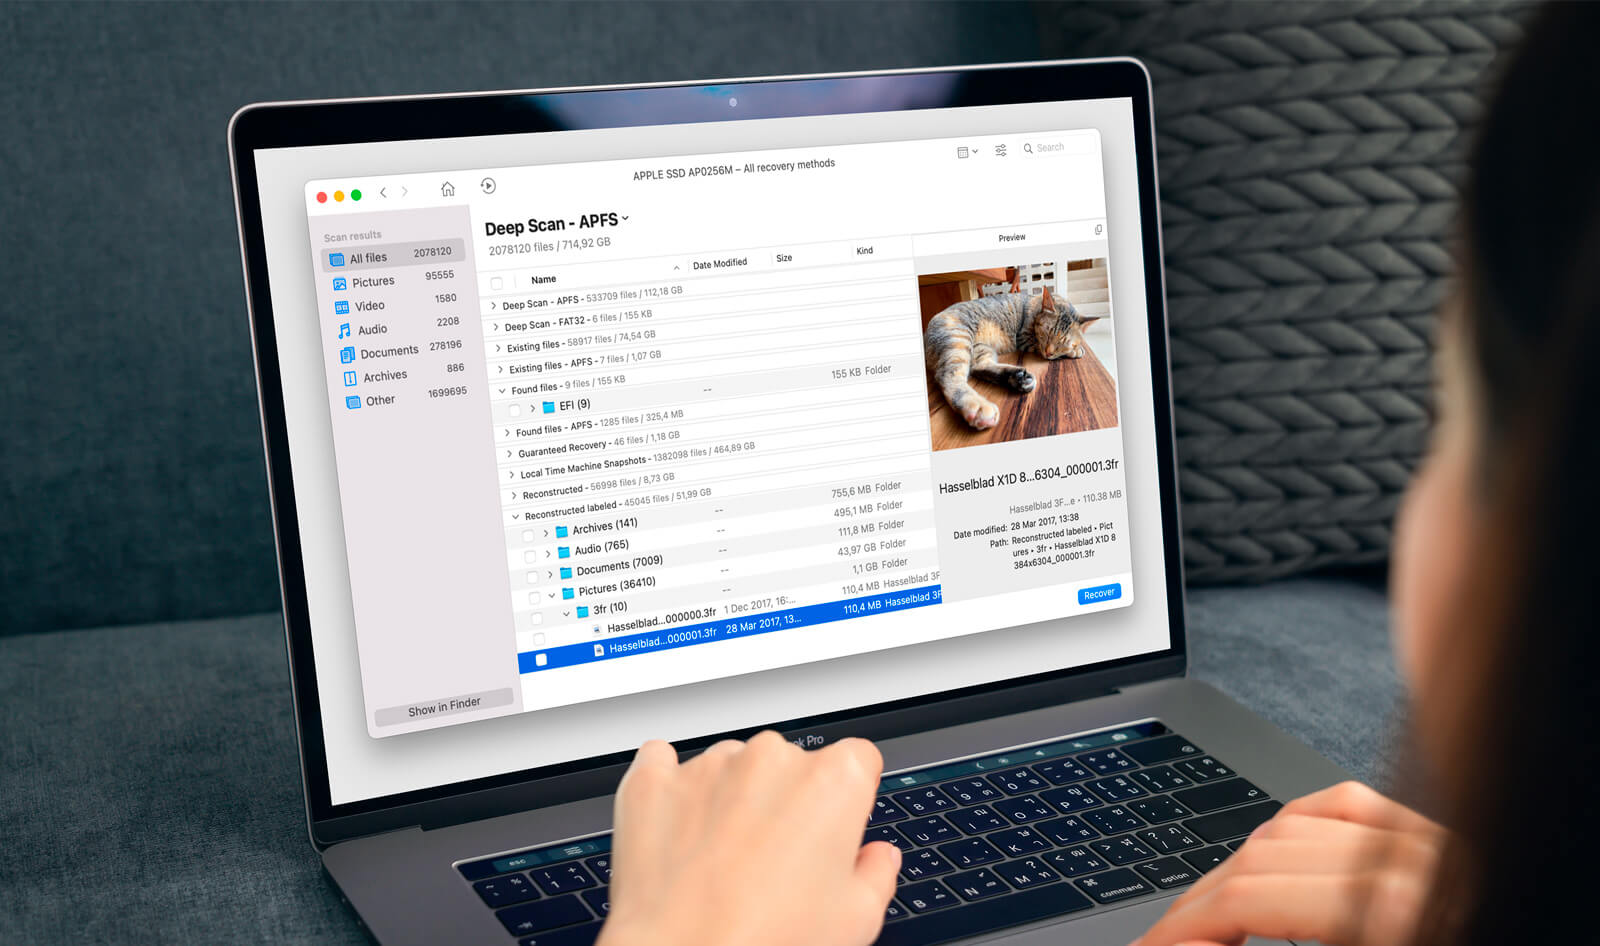 how to recover photos from macbook pro